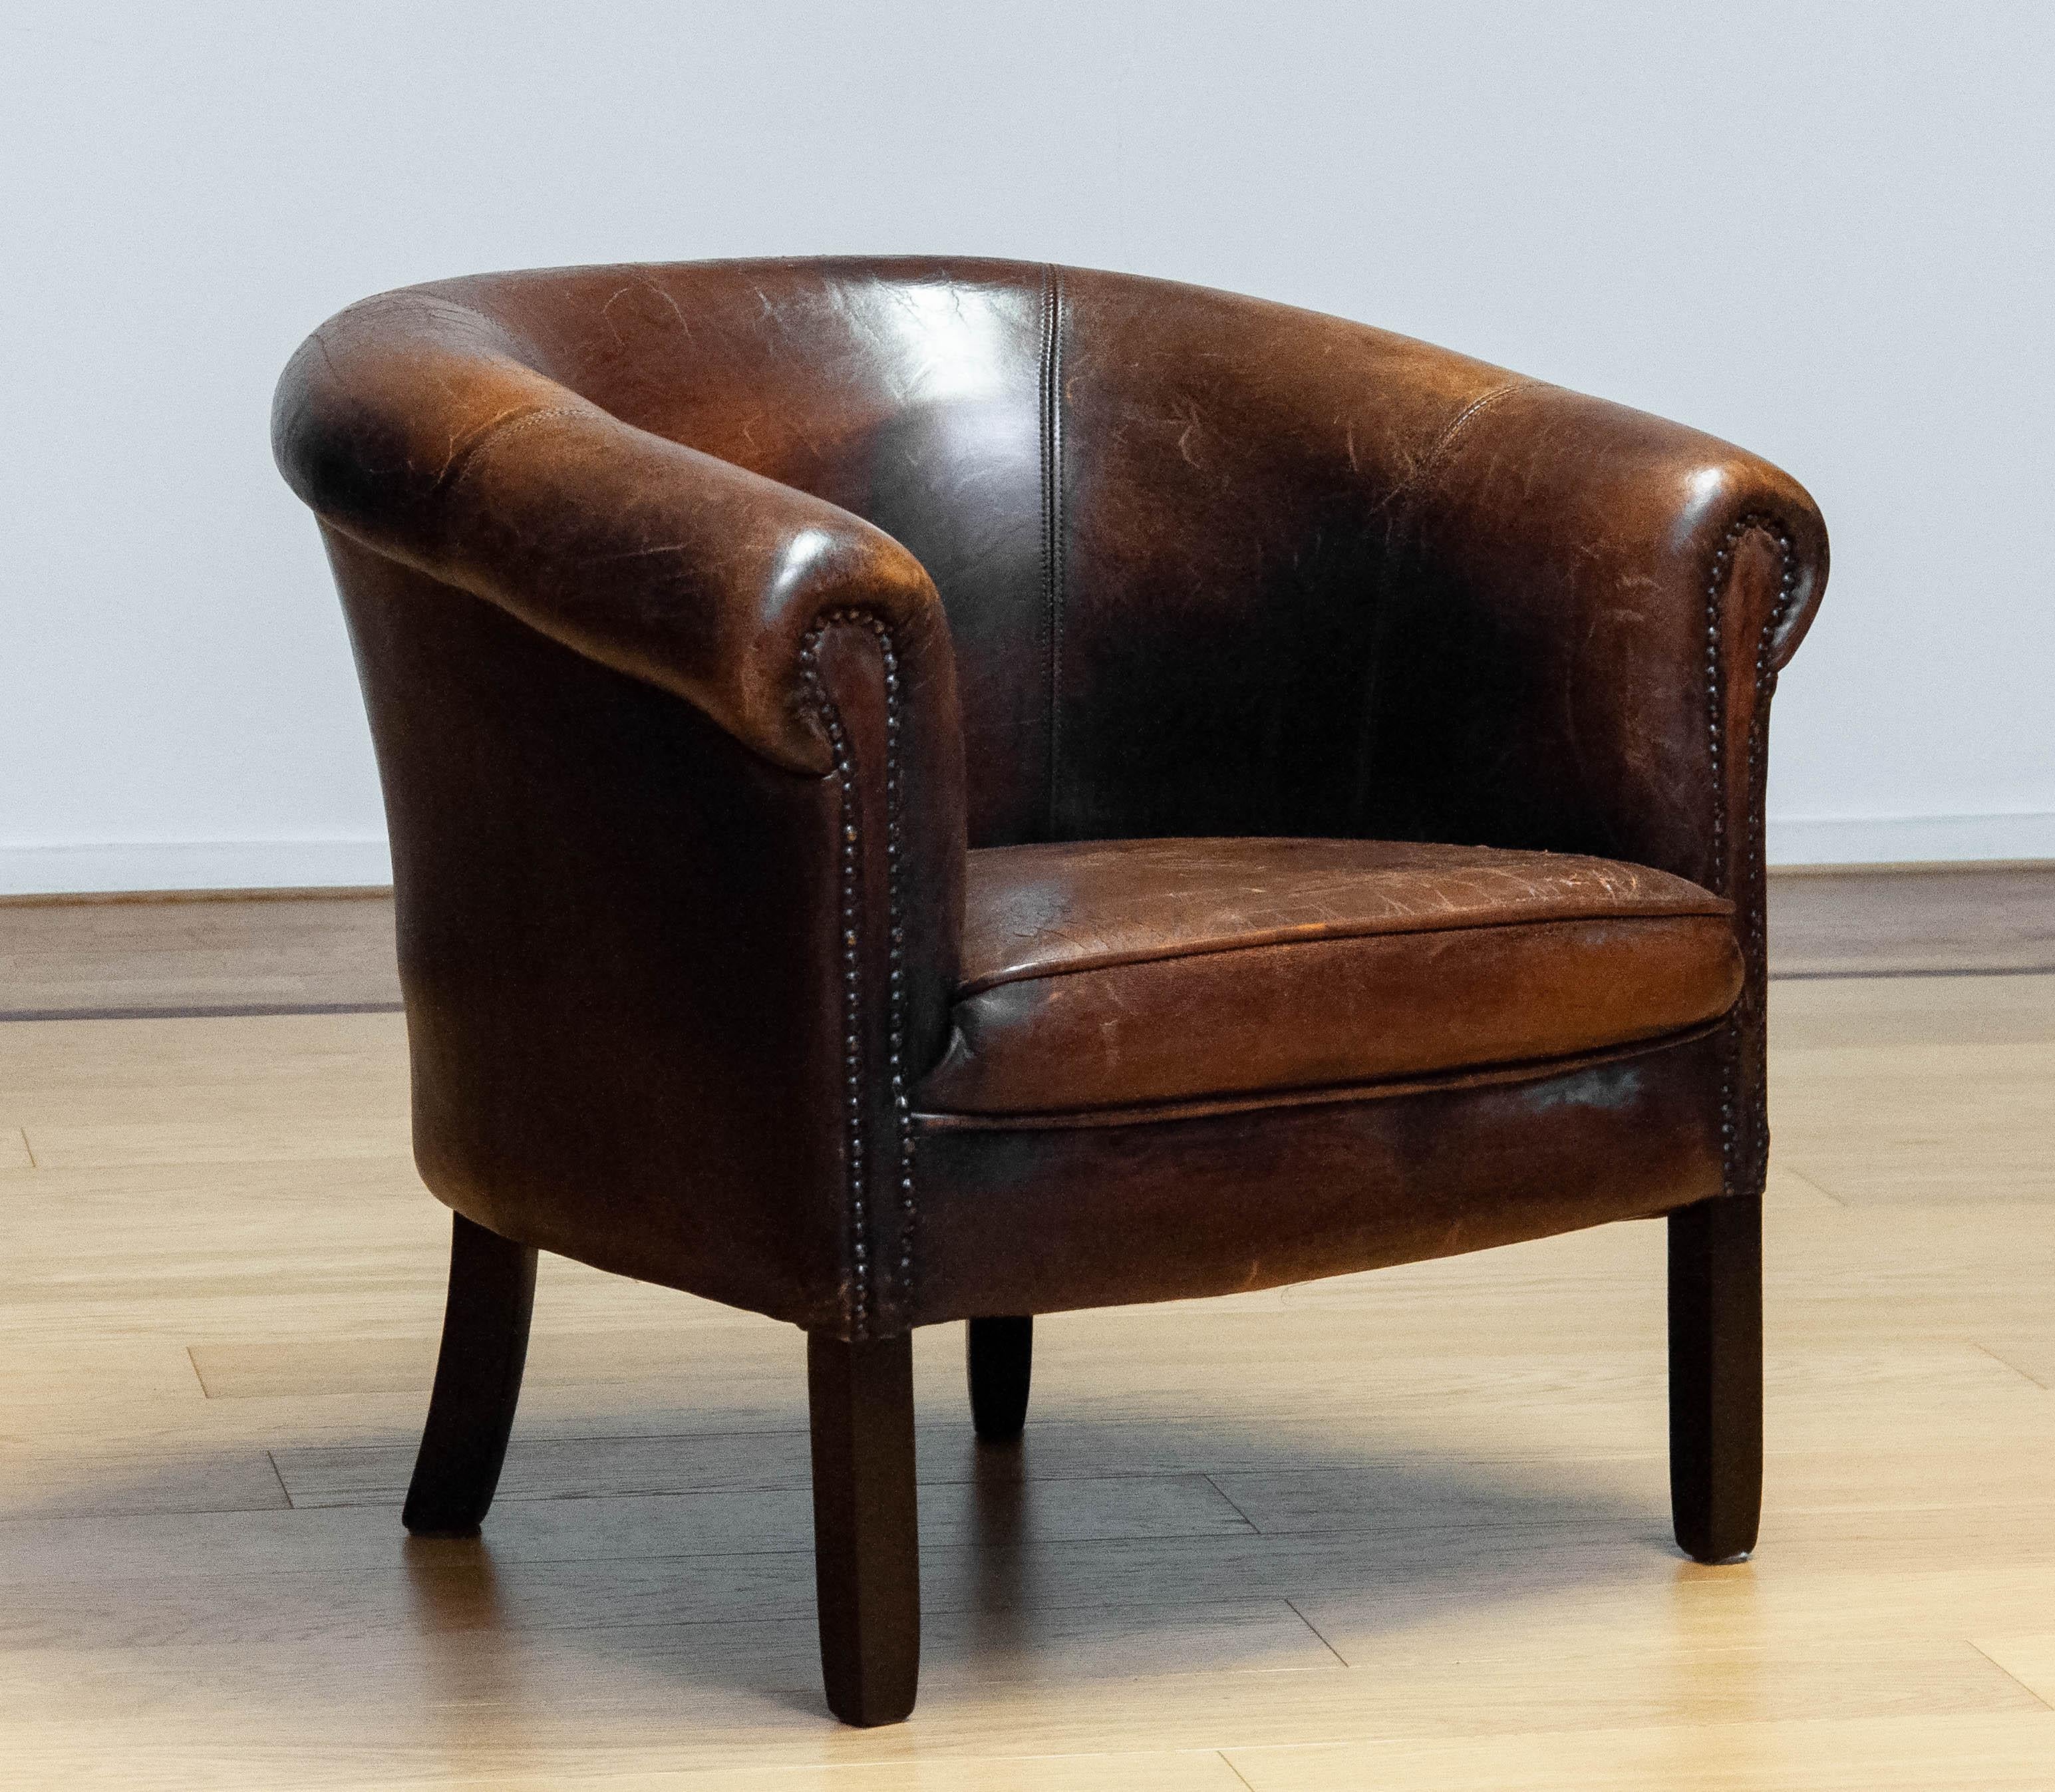 1960 Patinated Dark Brown Dutch Colonial Sheepskin Upholstered Lounge Club Chair In Good Condition For Sale In Silvolde, Gelderland